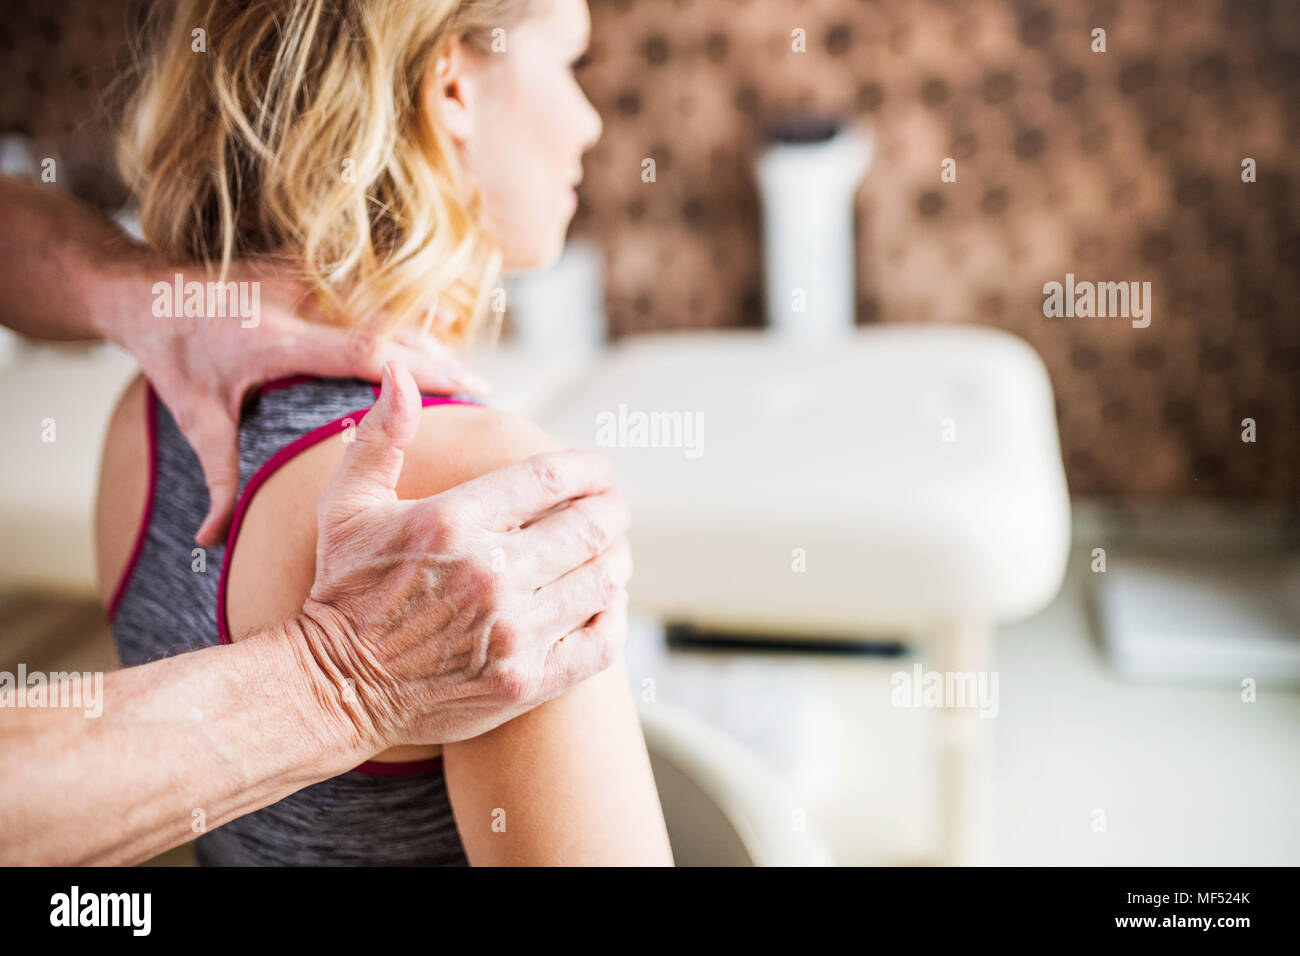 Unrecognizable physiotherapist working with a female patient. Stock Photo